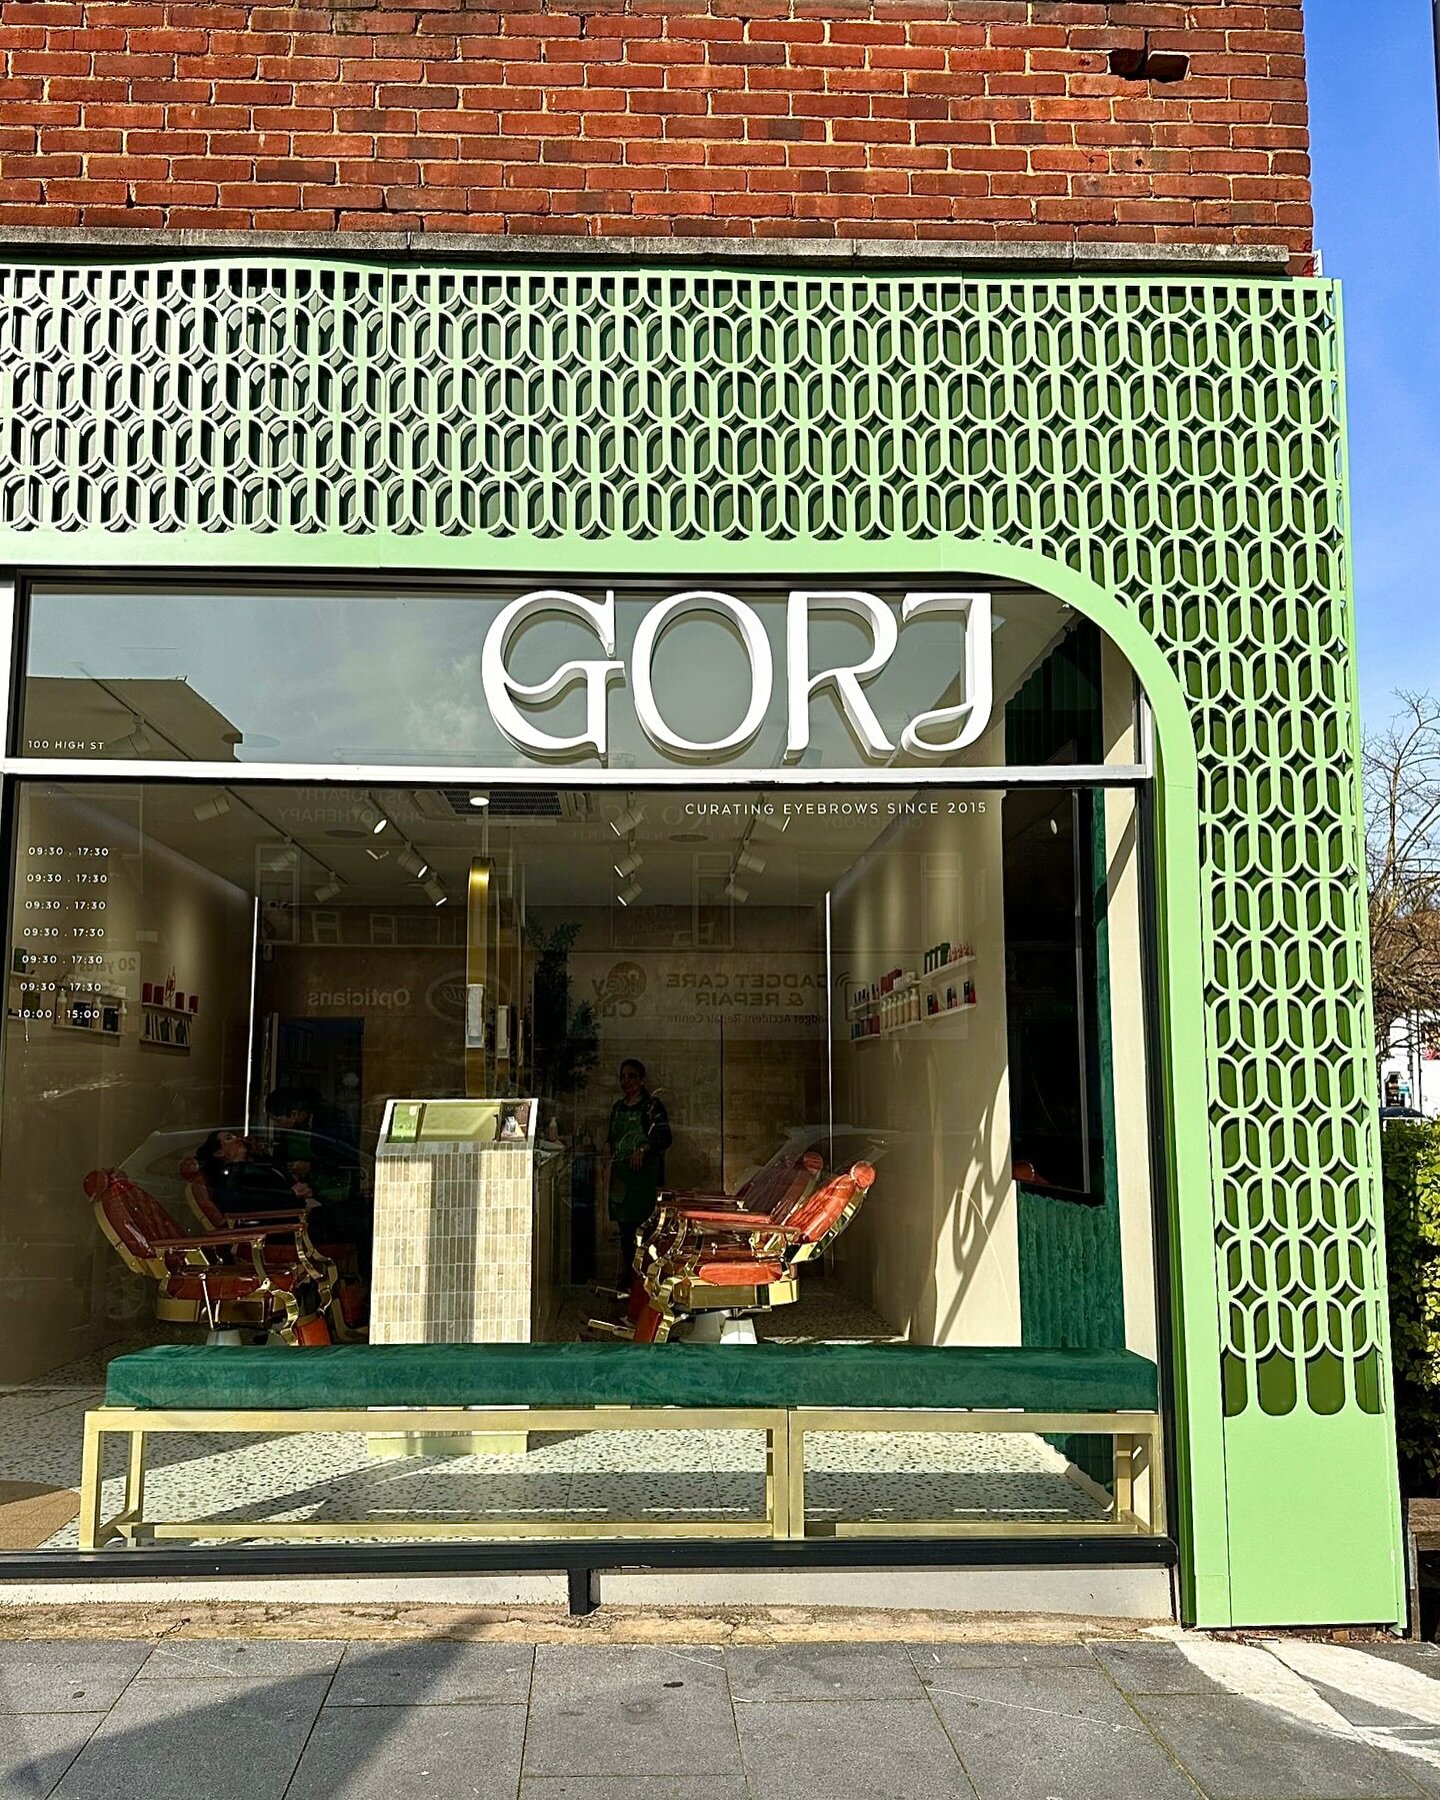 Spring has officially sprung today, and with it comes the return of Vitamin D to give us that radiant glow! 🧡☀️🌸 Embrace the sunshine and let your skin soak up the goodness! 

#SpringGlow #VitaminDRevival #Gorj #Gorjbeauty #gorjstrood #strood #roch